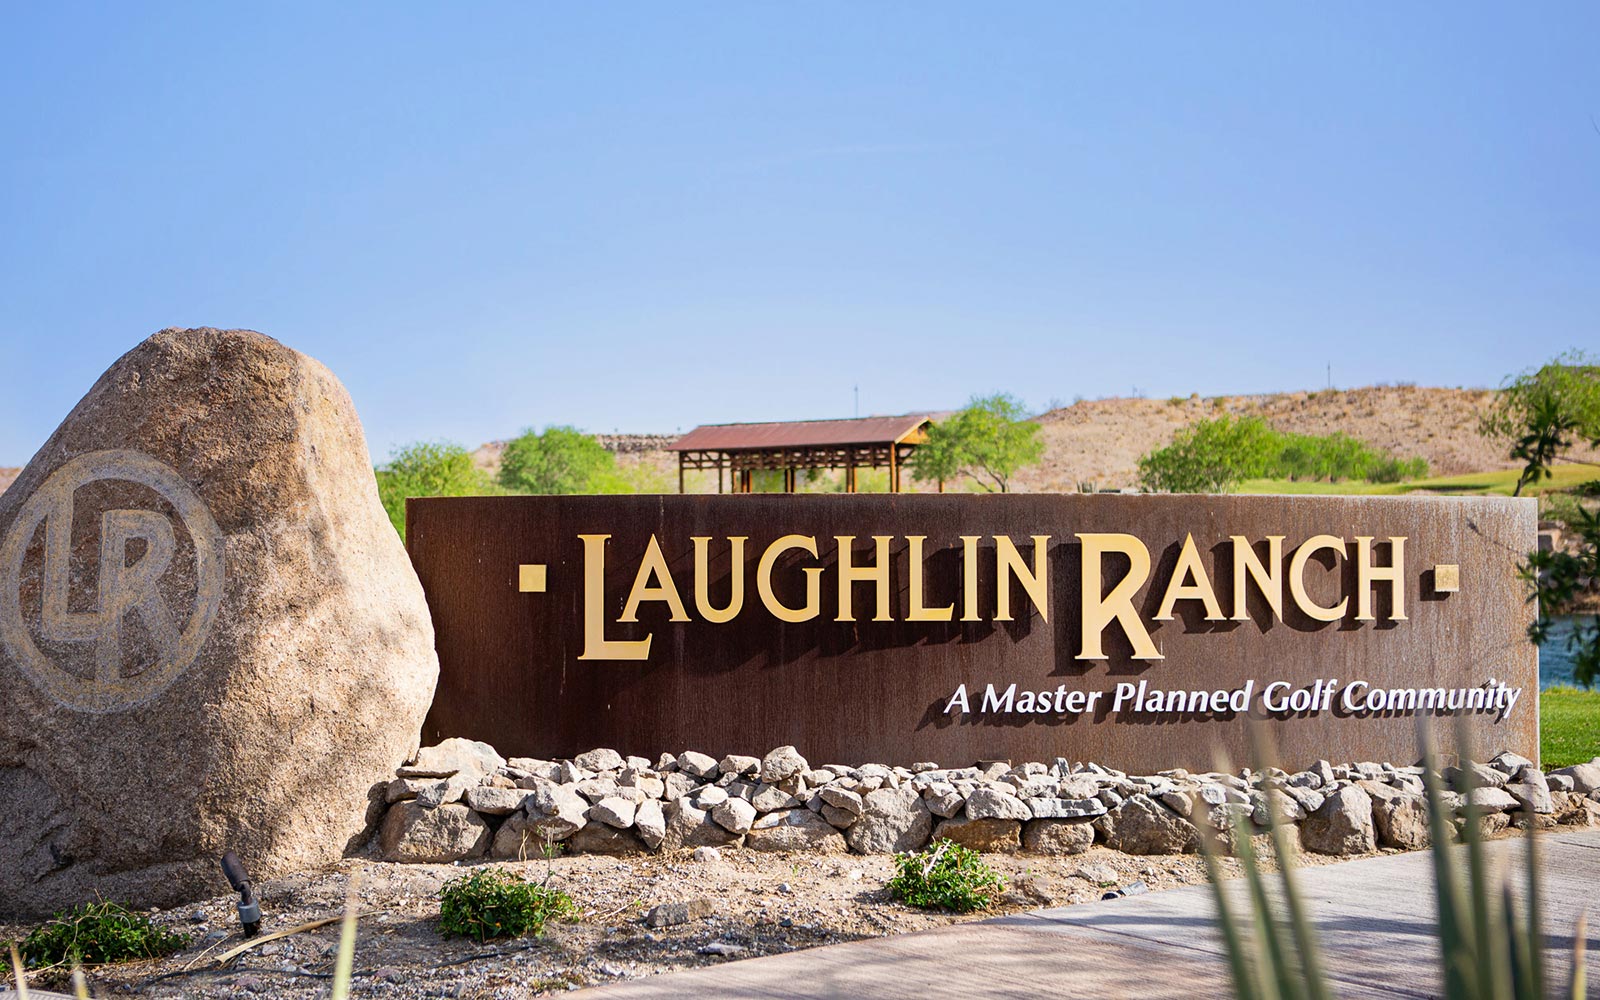 Laughlin Ranch monument sign